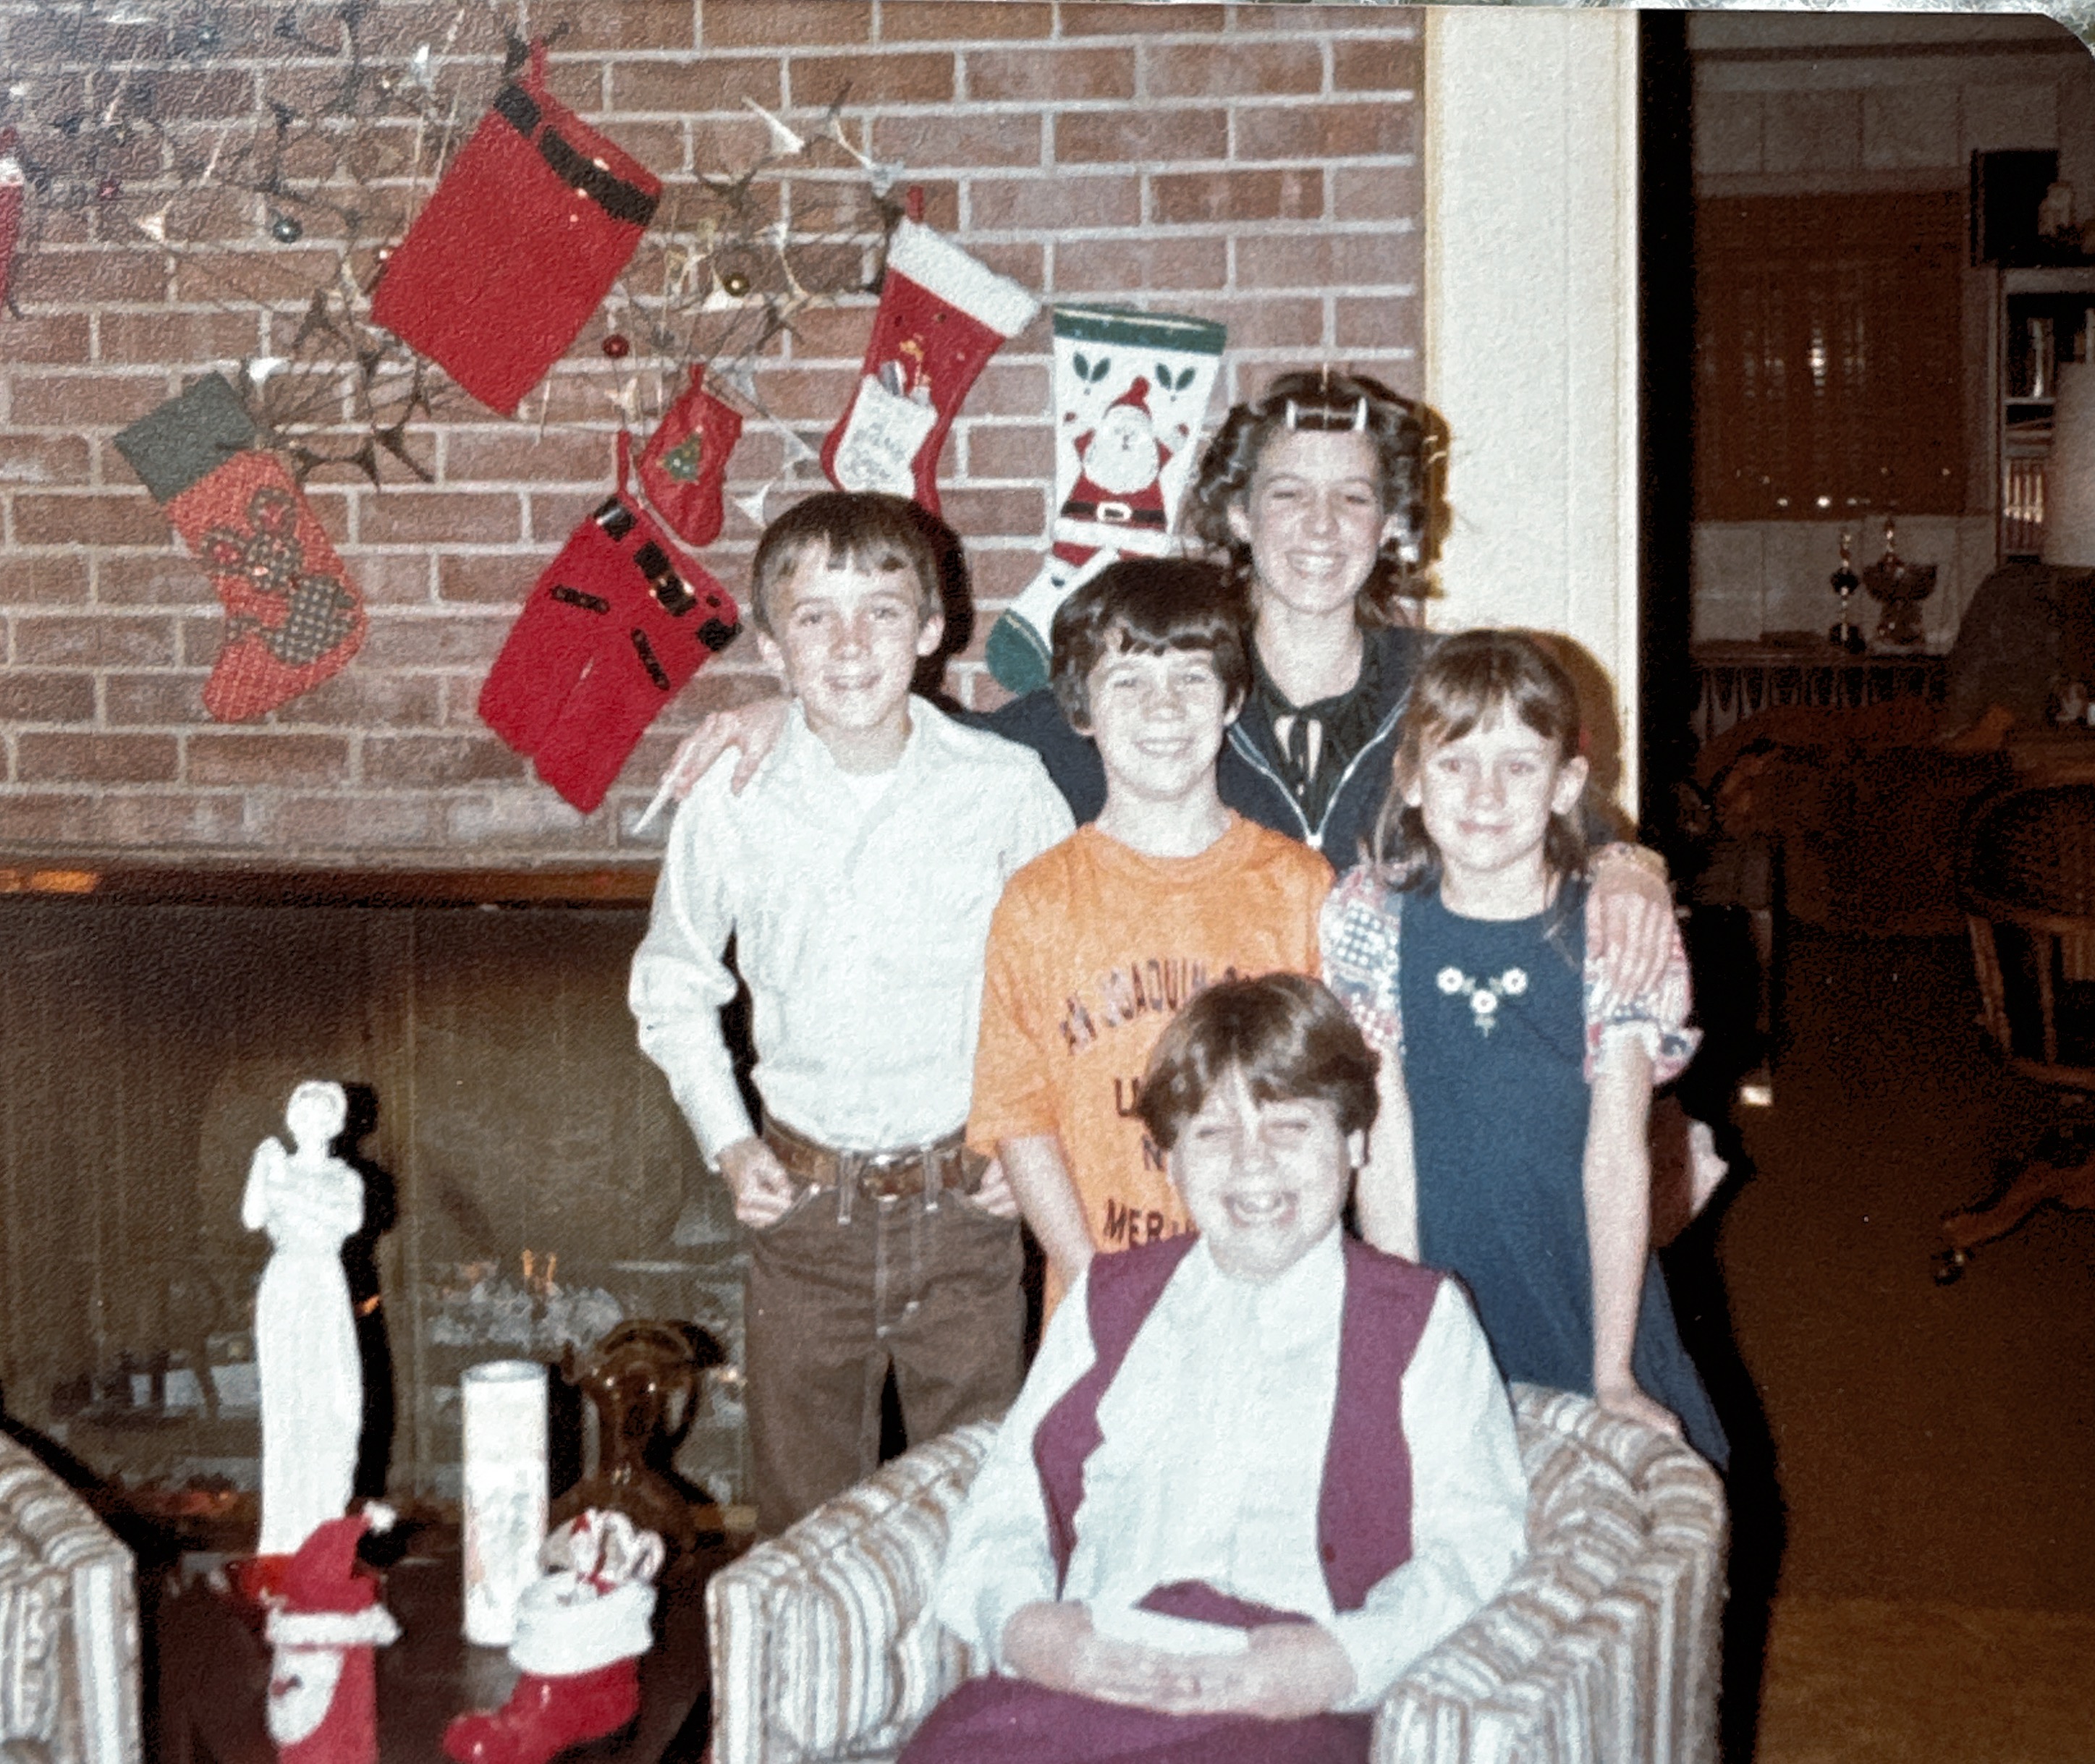 Christmas visit with cousins Shannon, Jason, Cynthia, Monica, and seated Jill. 1974 or 1975